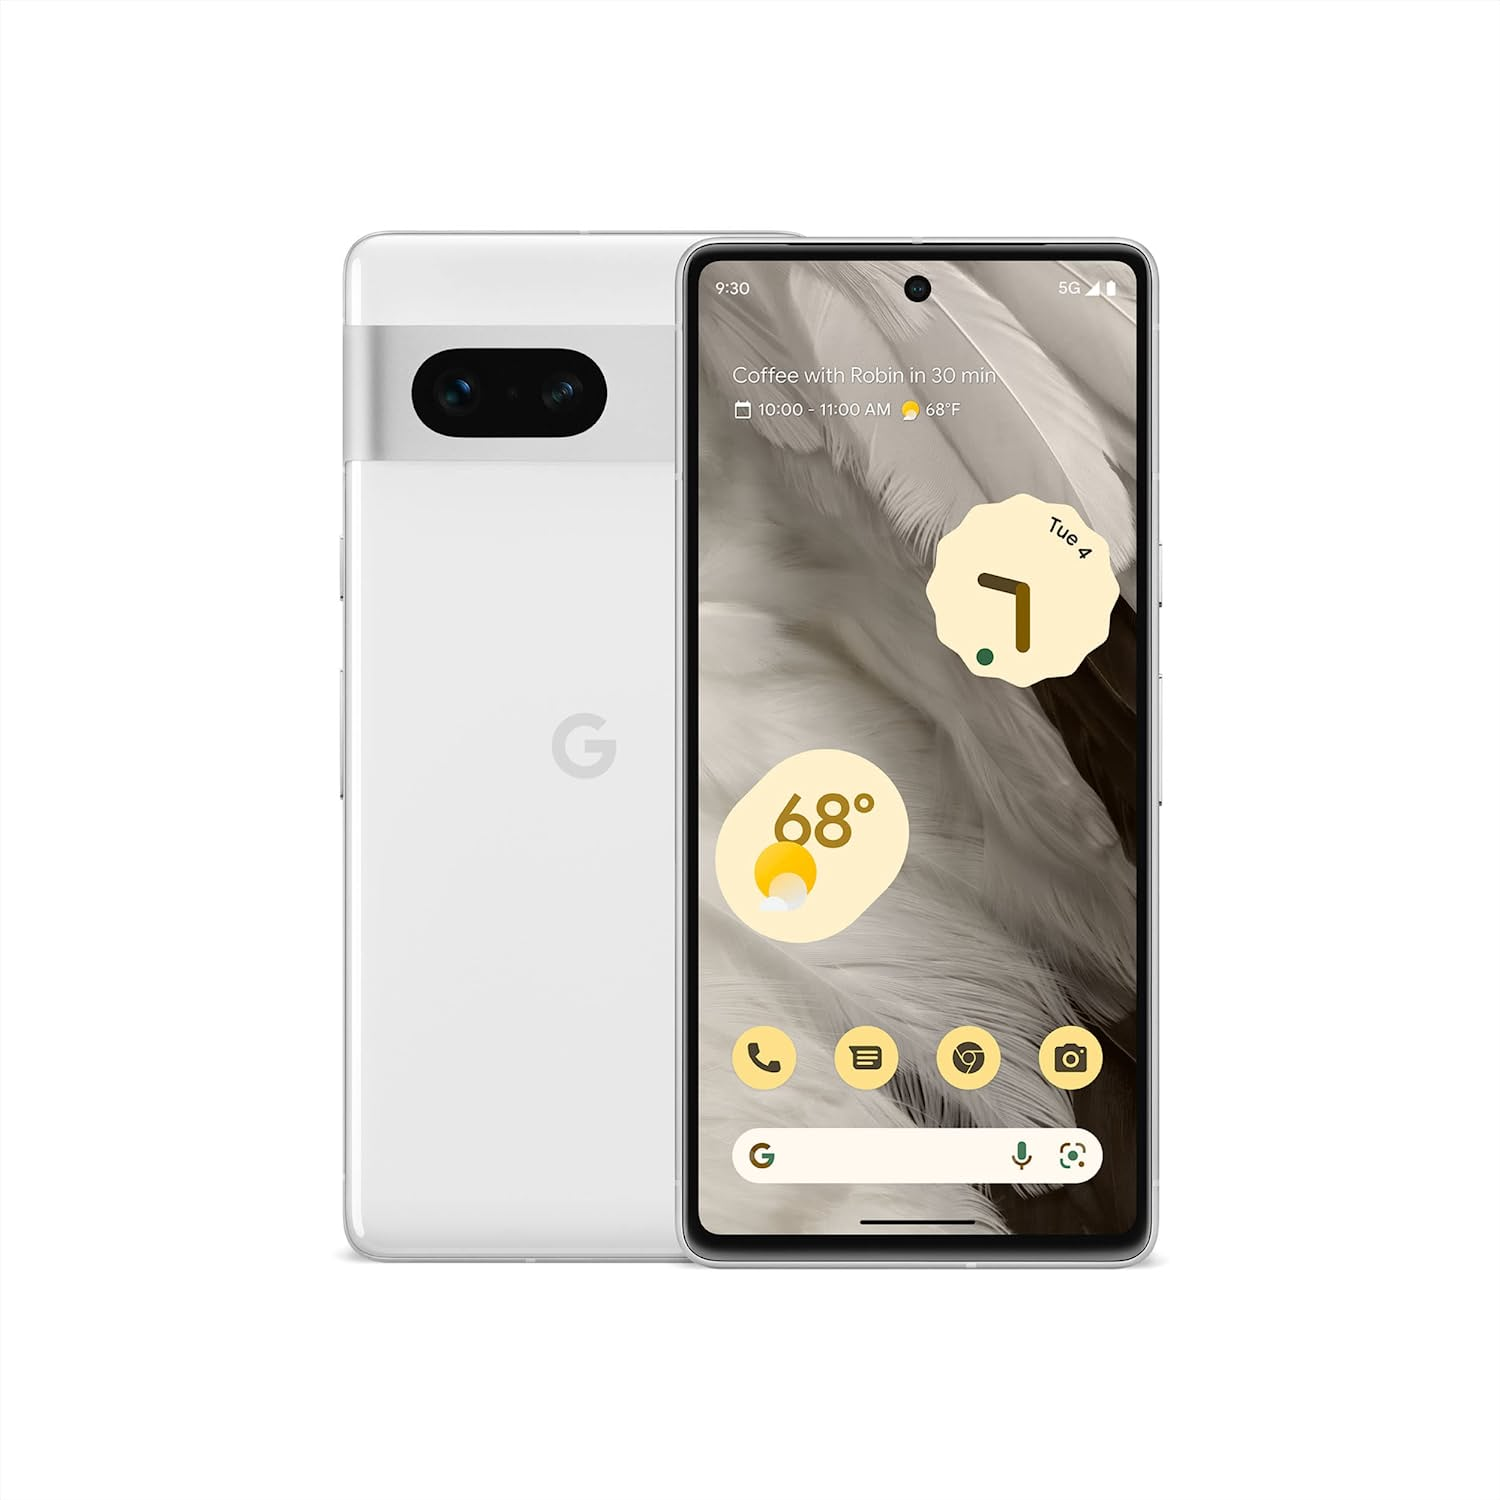 This image shows the Google Pixel 7.